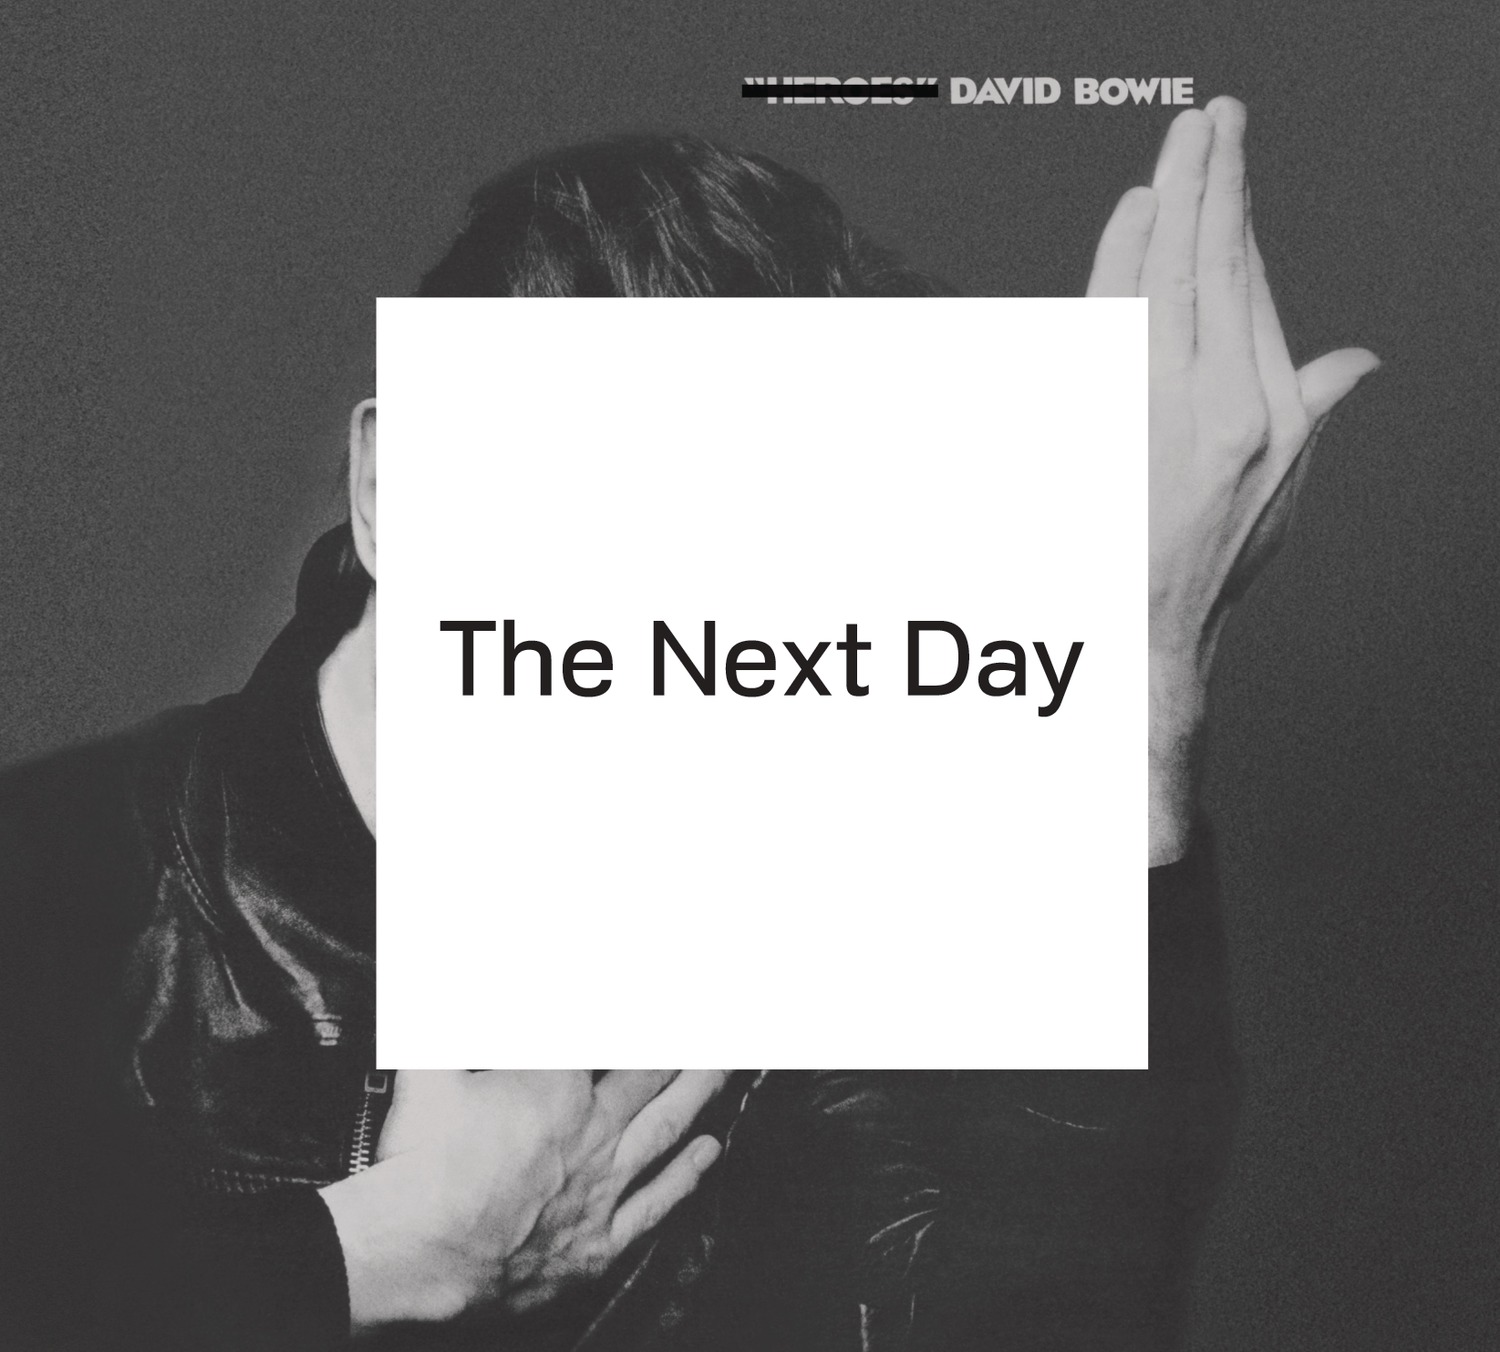 David Bowie - 2013 - The Next Day Deluxe Edition [2013] 24-96